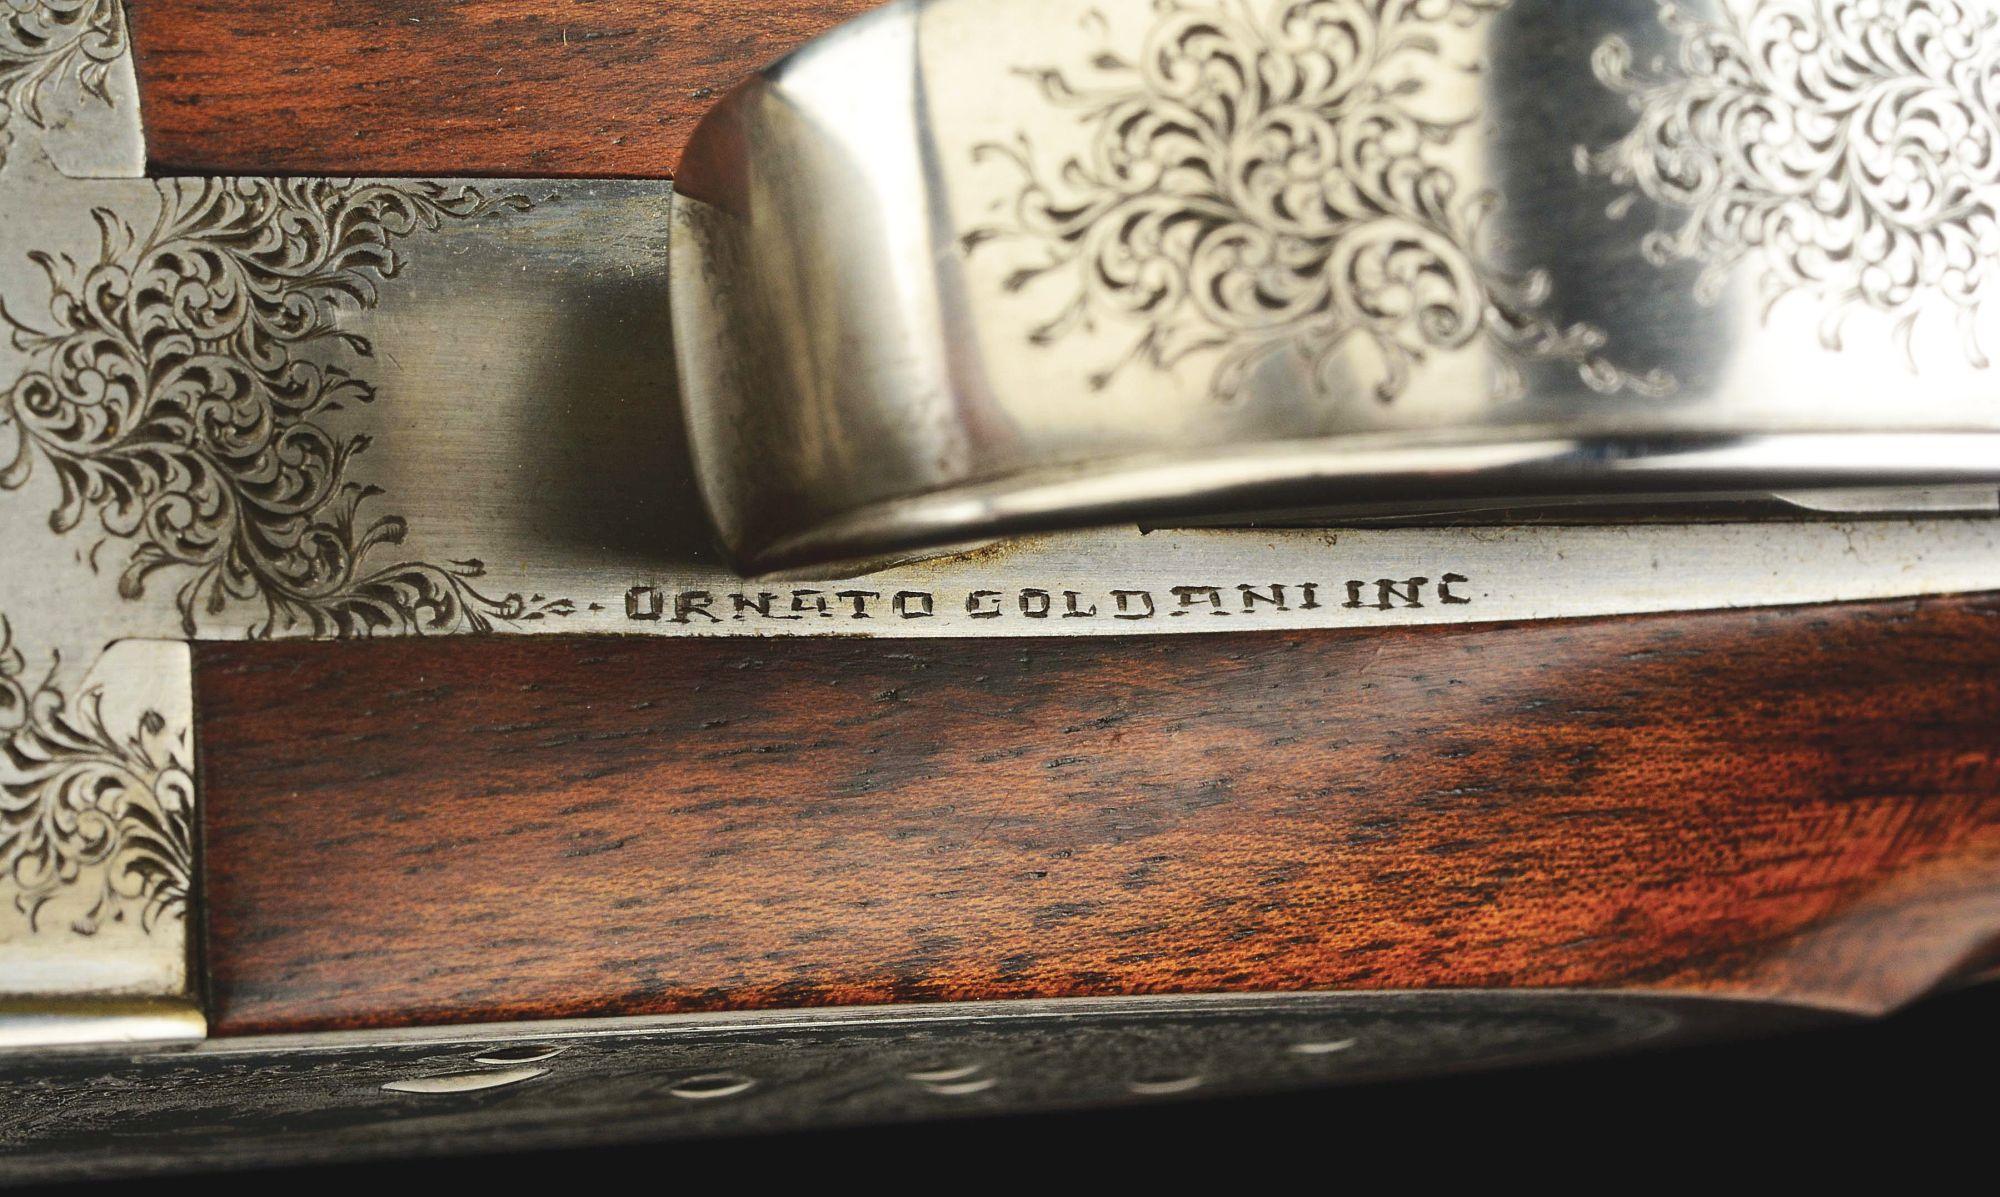 (M) BEAUTIFUL 28 GAUGE ABBIATICO & SALVINELLI SIDELOCK EJECTOR SINGLE TRIGGER GAME SHOTGUN WITH EXCE